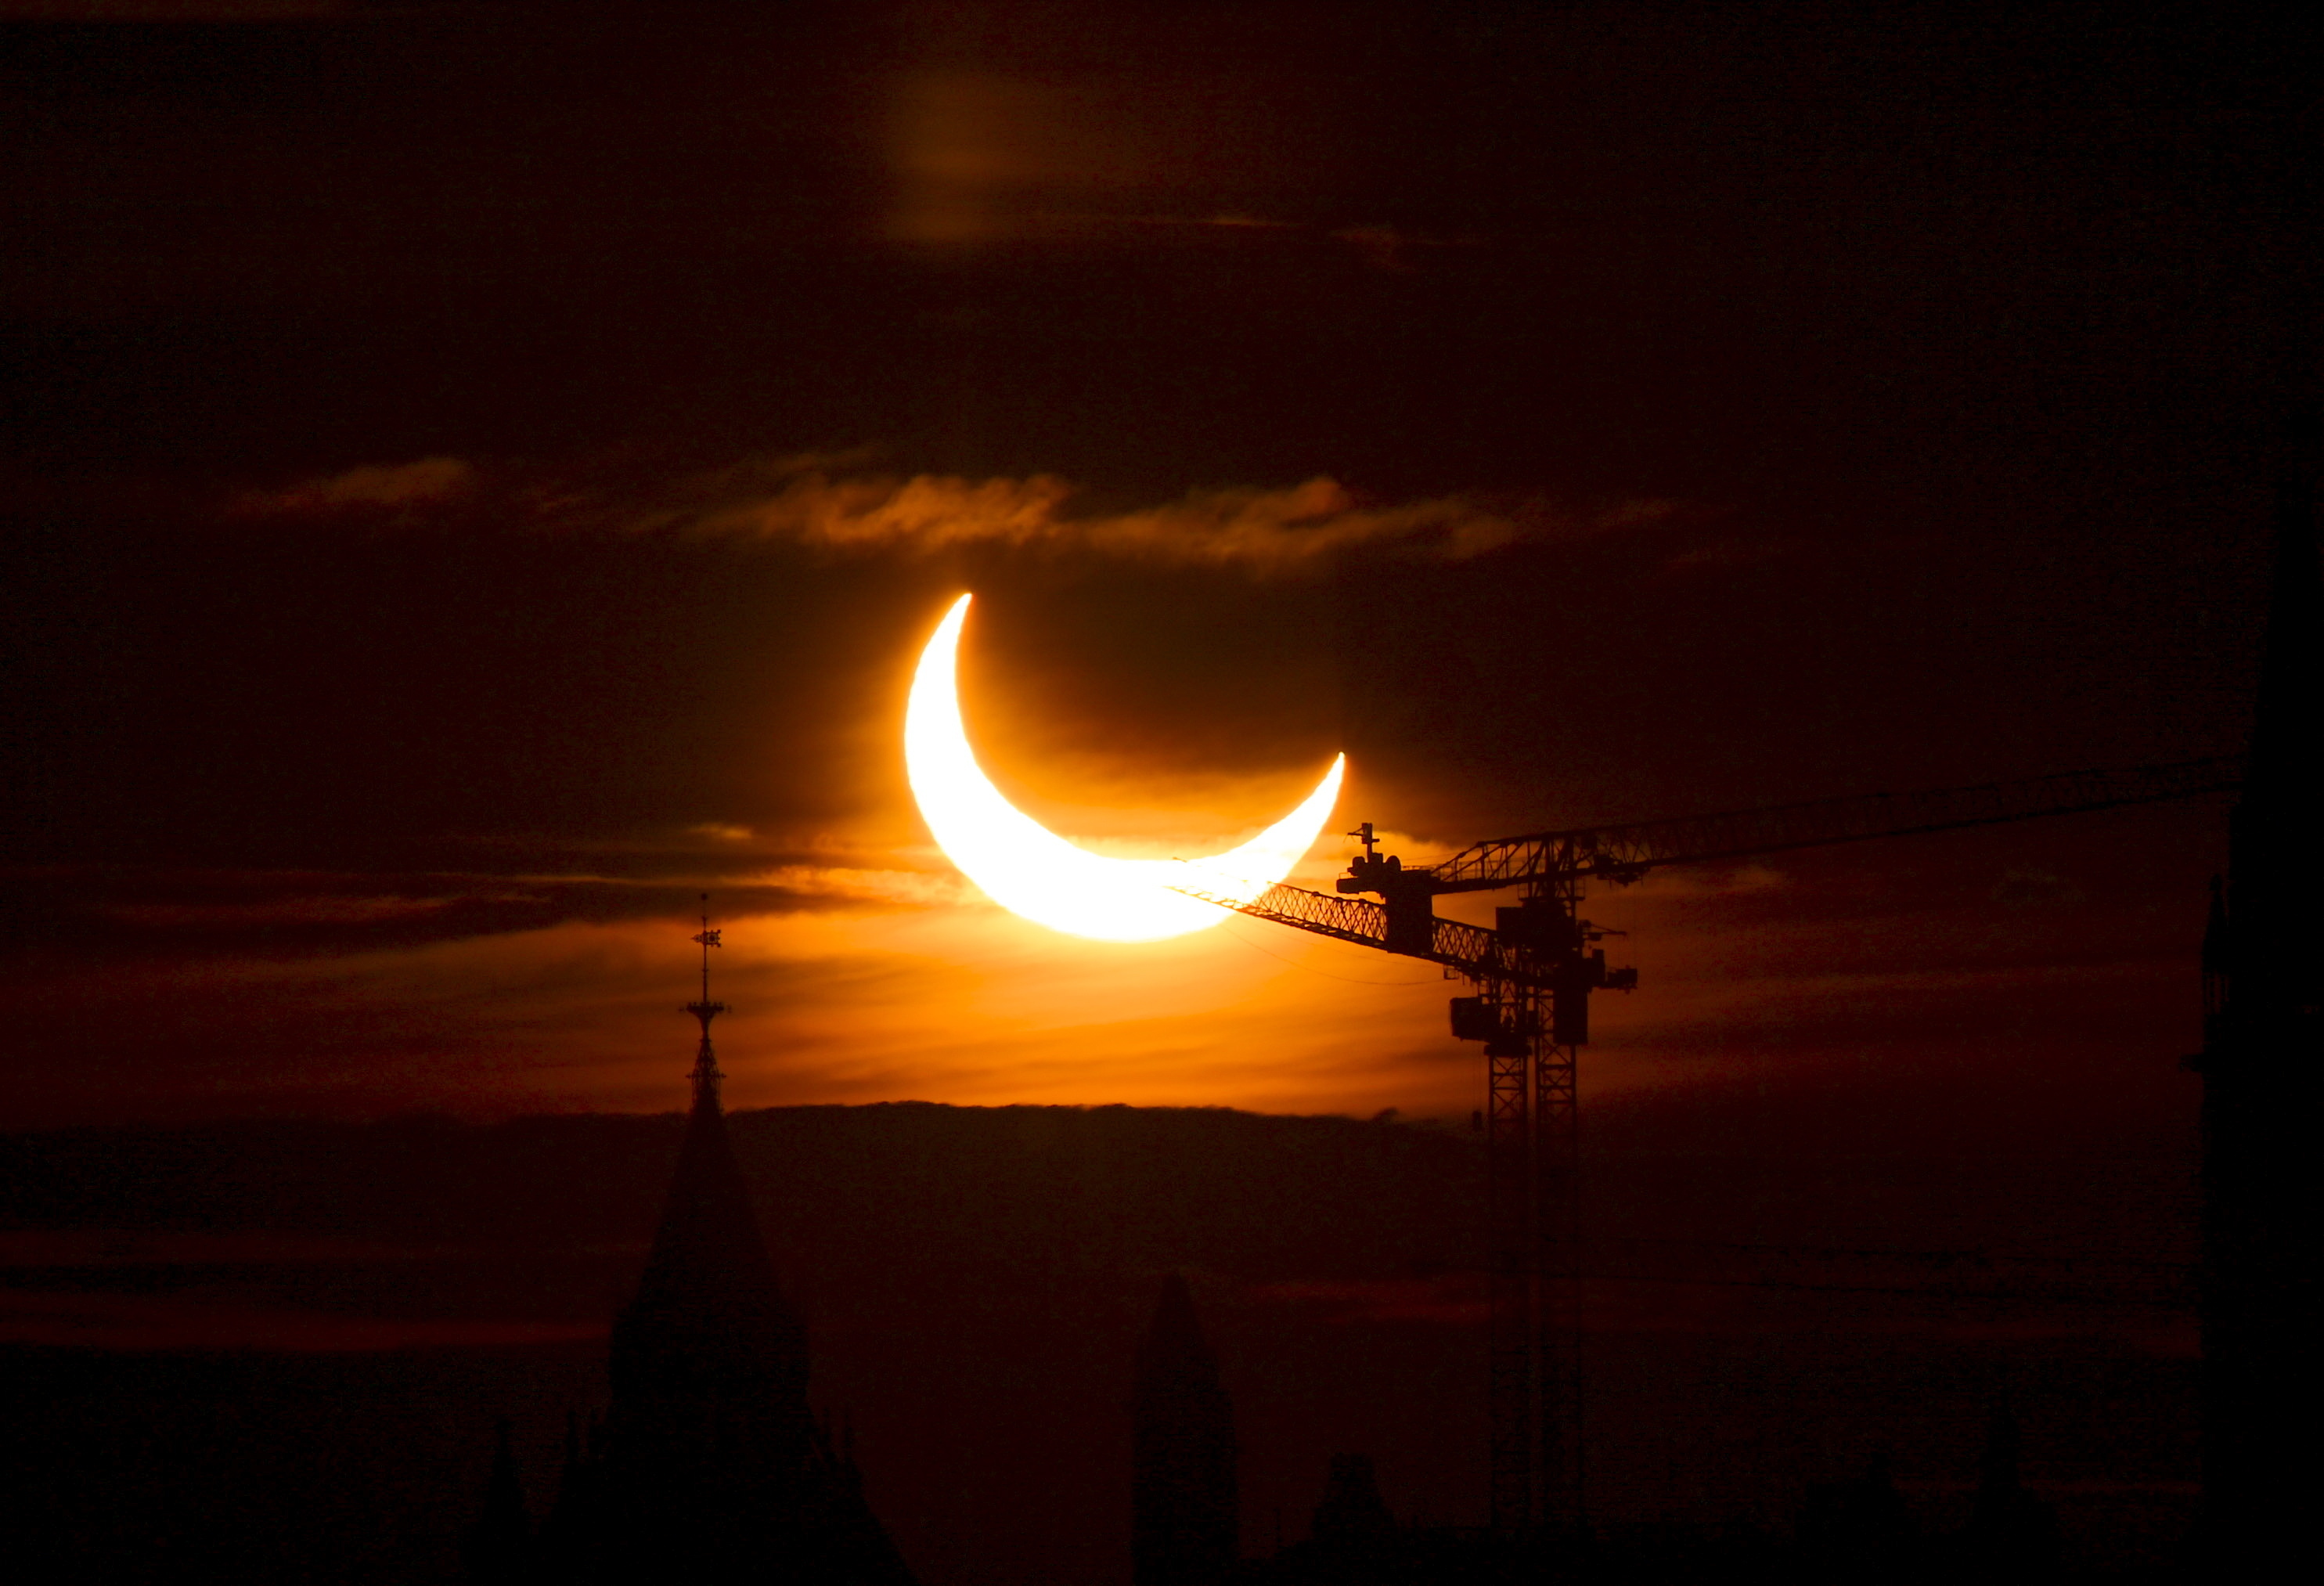 An annular solar eclipse rises over construction cranes and the Peace Tower on Parliament Hill in Ottawa on Thursday, June 10, 2021. (Sean Kilpatrick/The Canadian Press via AP)